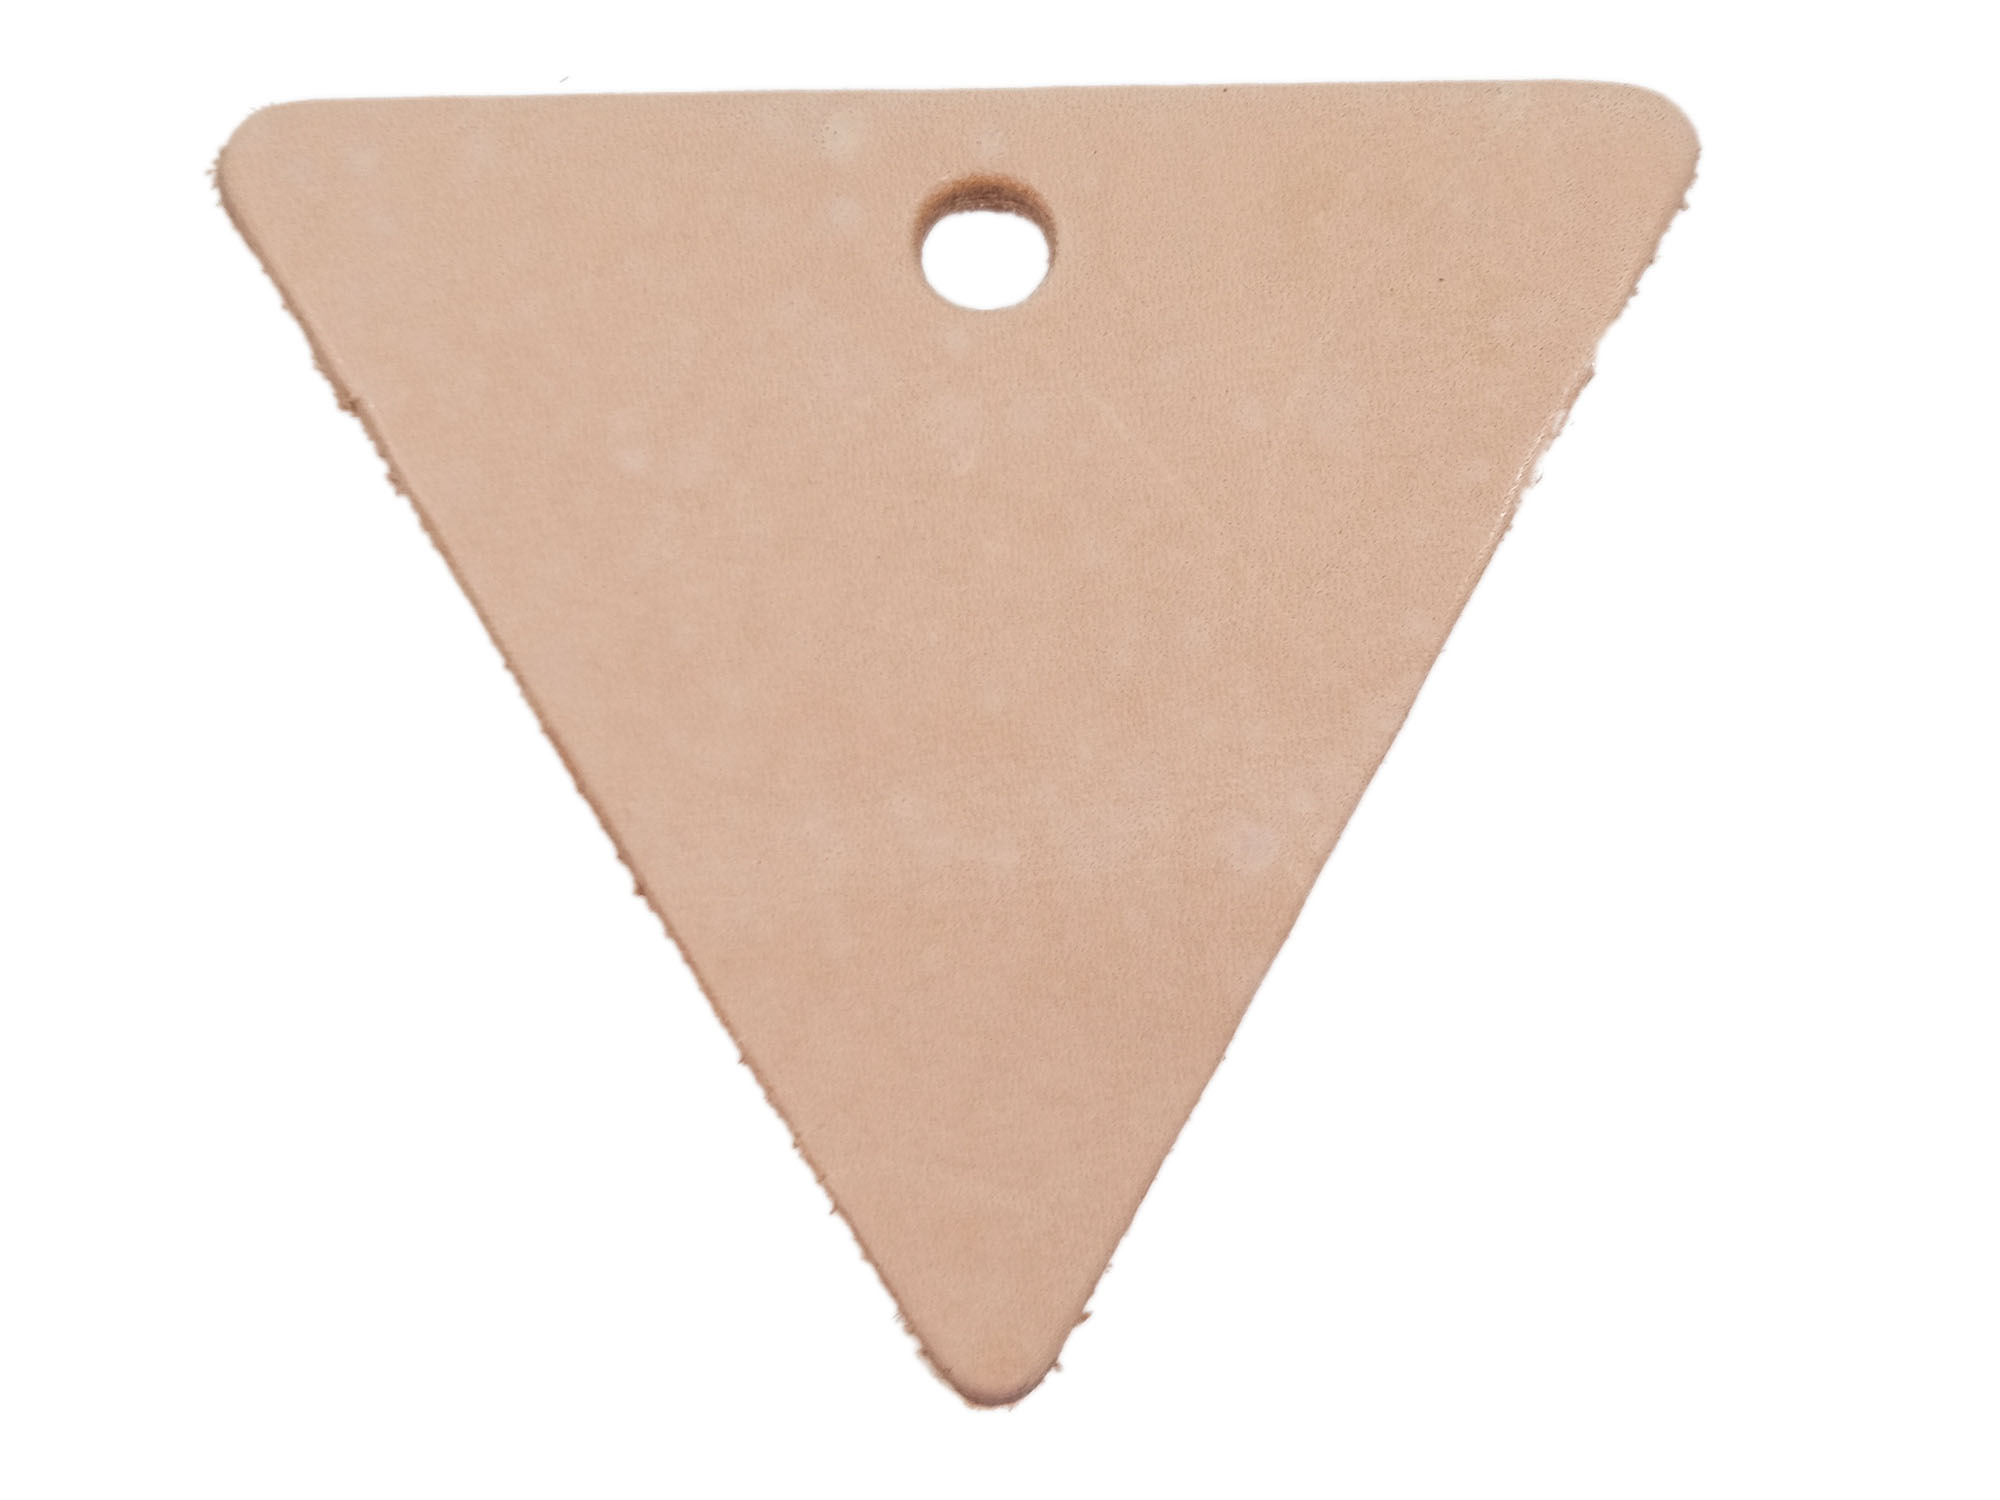 Leather Triangle with Hole leather triangles, leather cut-outs, leather cutouts, leather cut outs